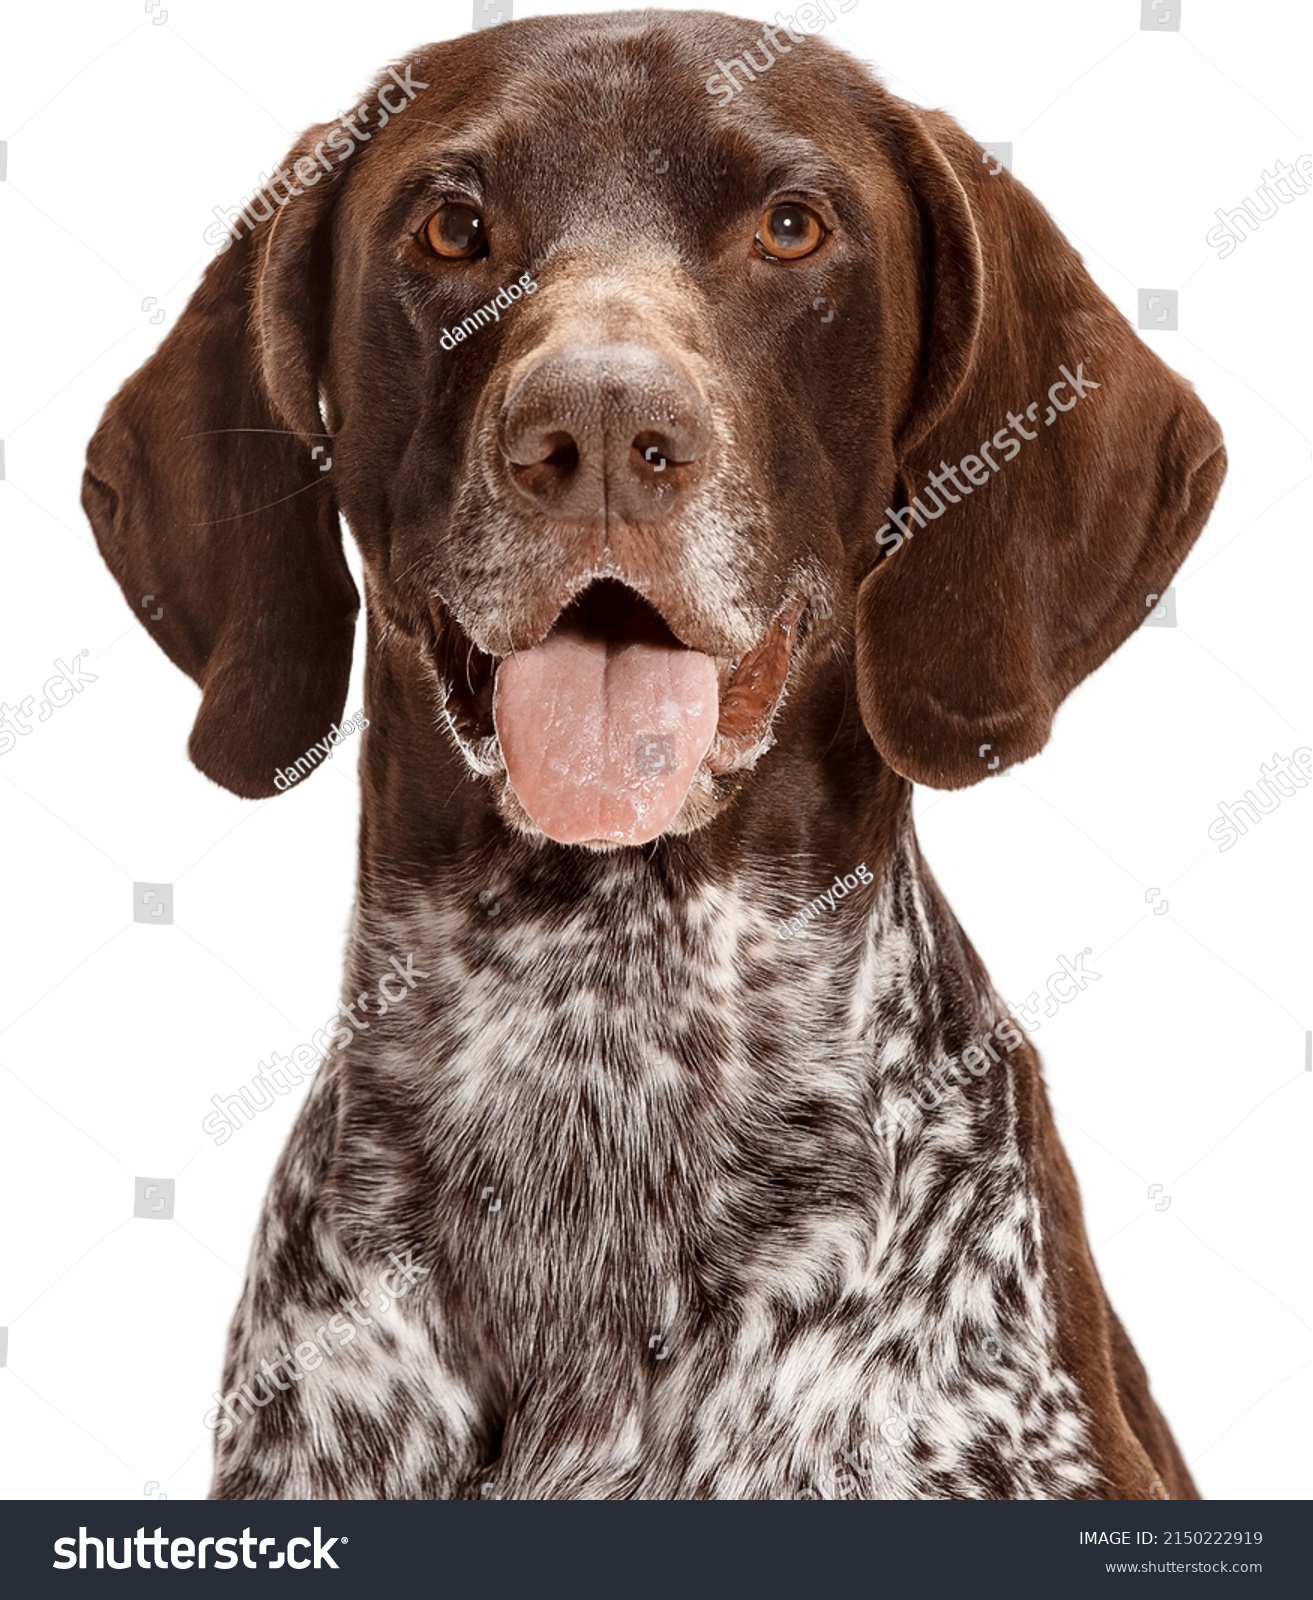 Portrait of a German Shorthaired Pointer dog isolated on a white background #2150222919